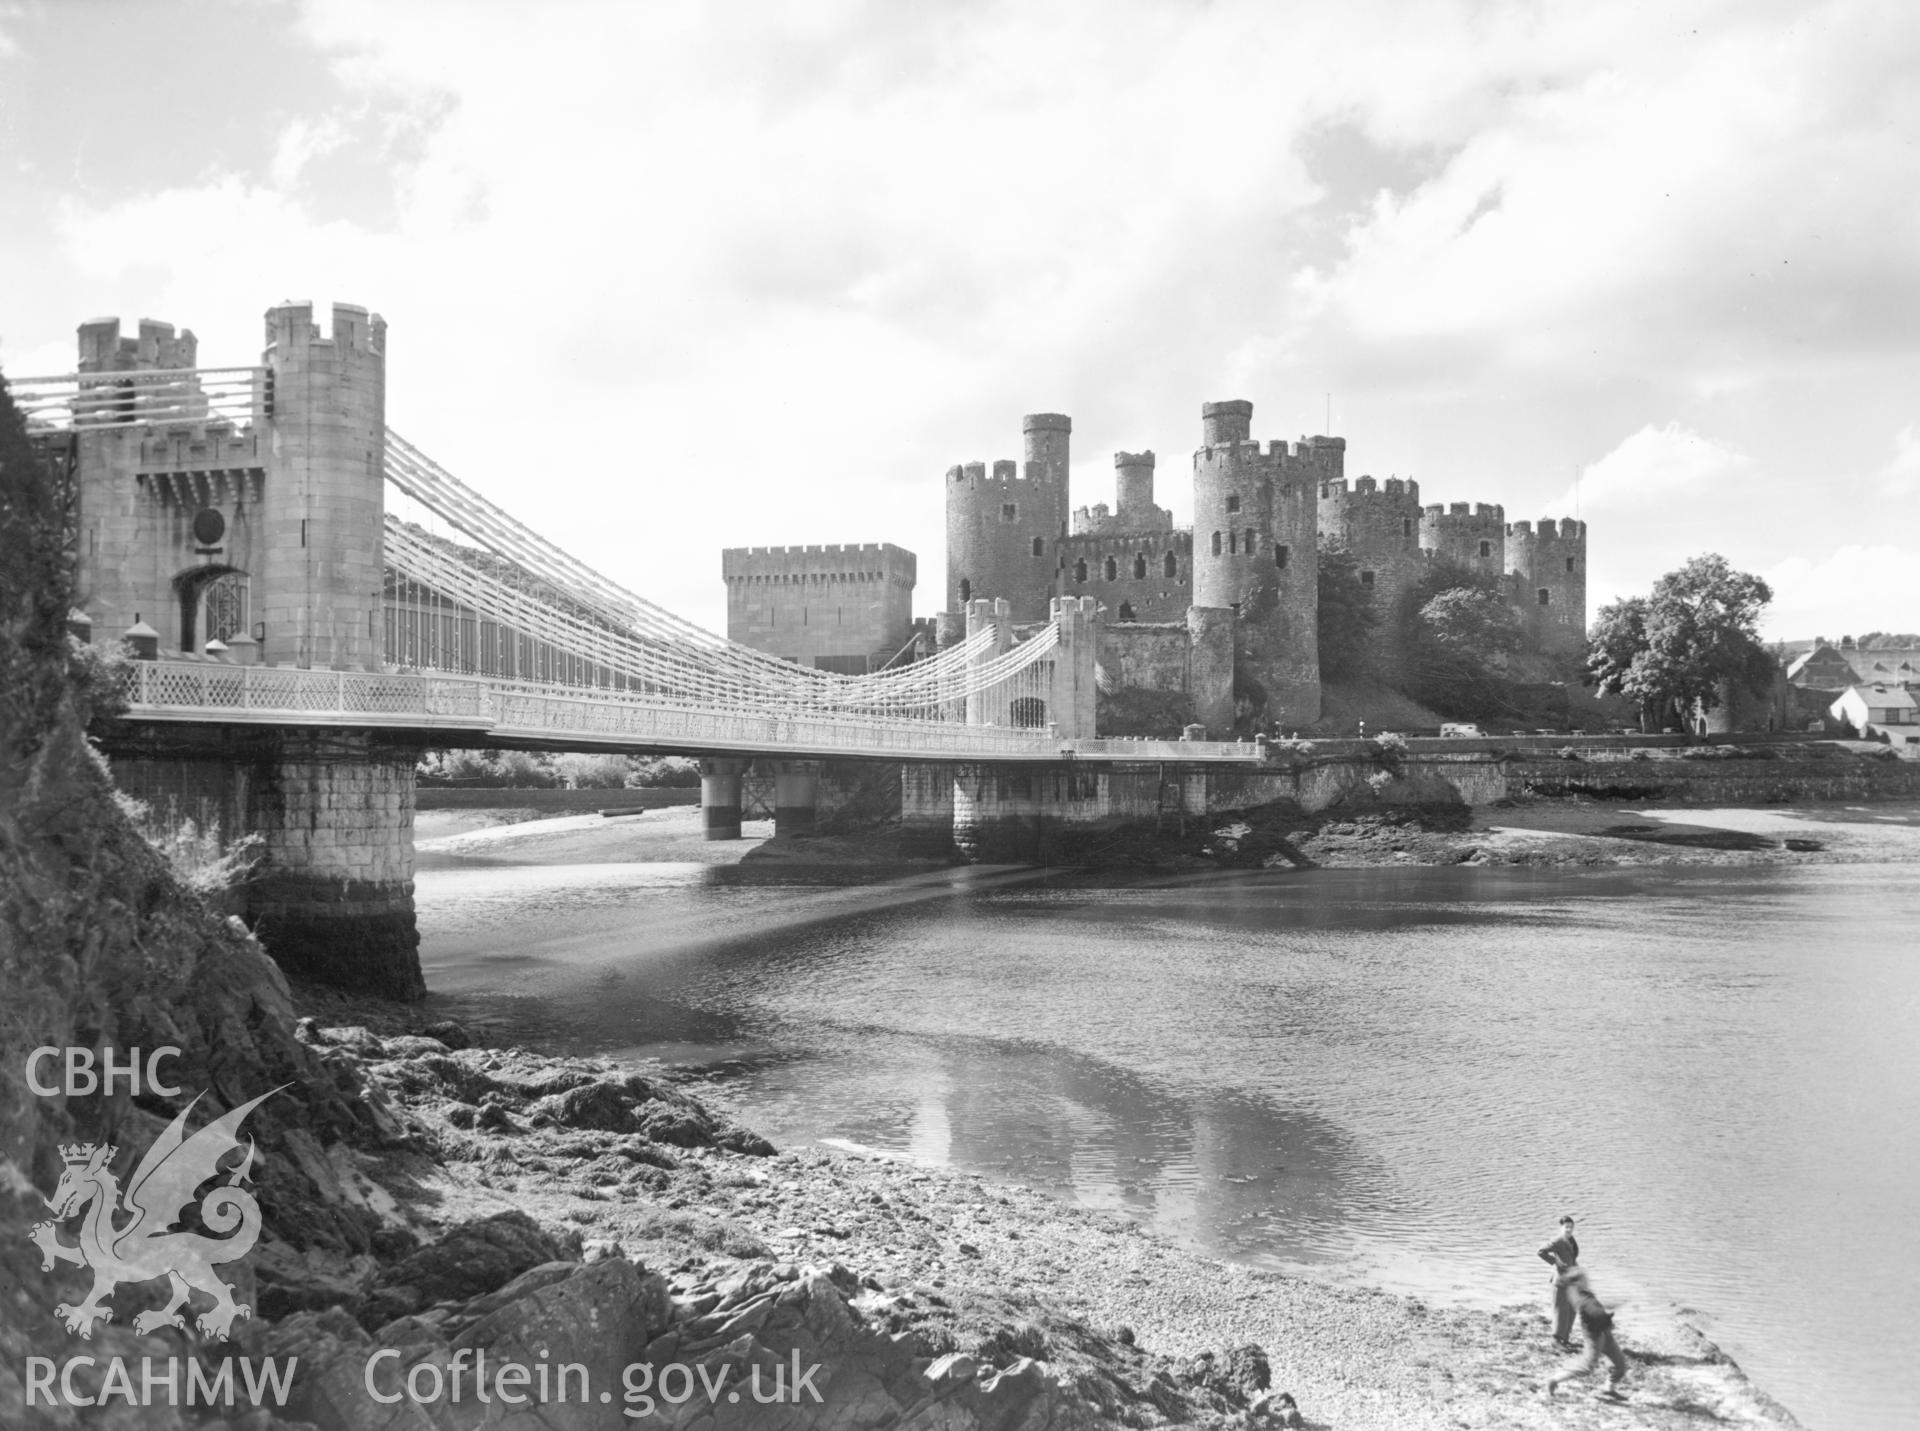 1 b/w print showing view of Conwy castle, collated by the former Central Office of Information.